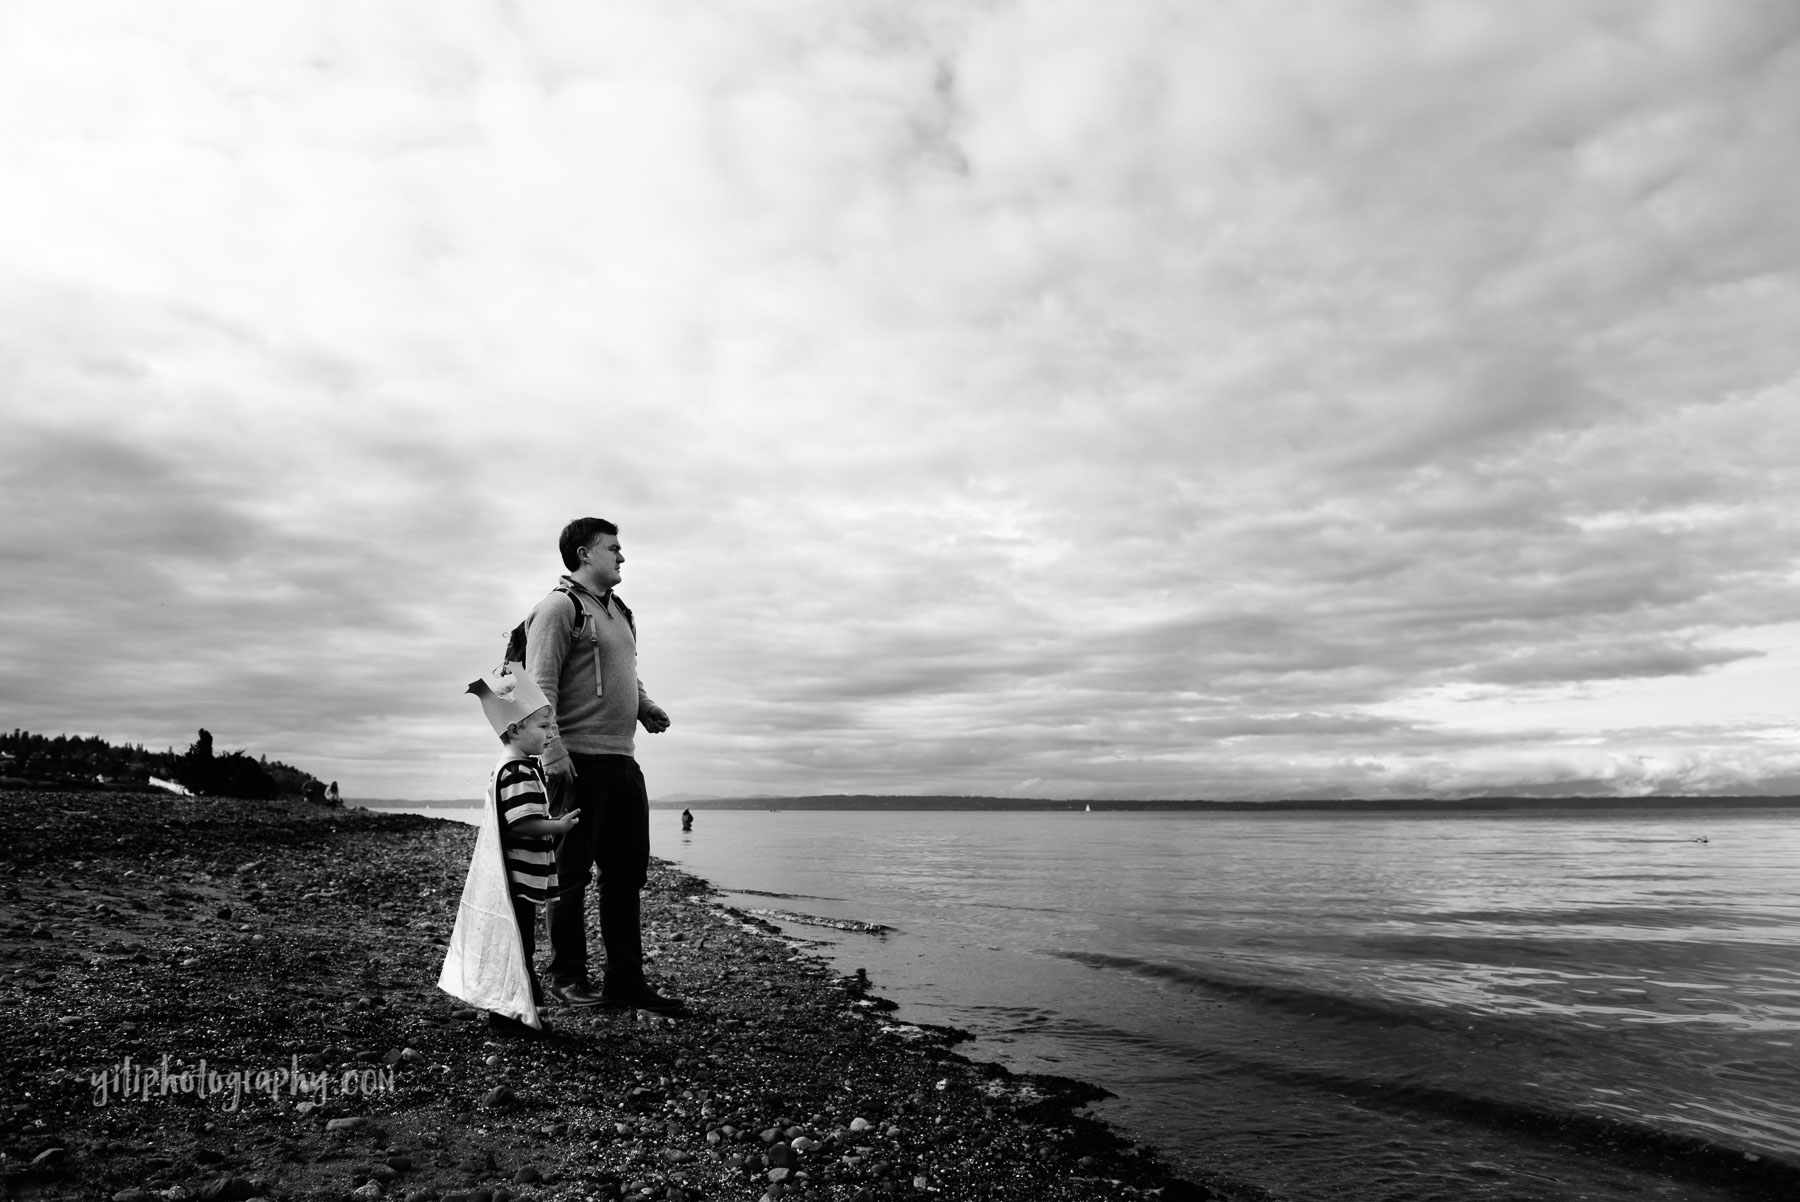 Father and son gazing out at ocean with dramatic clouds